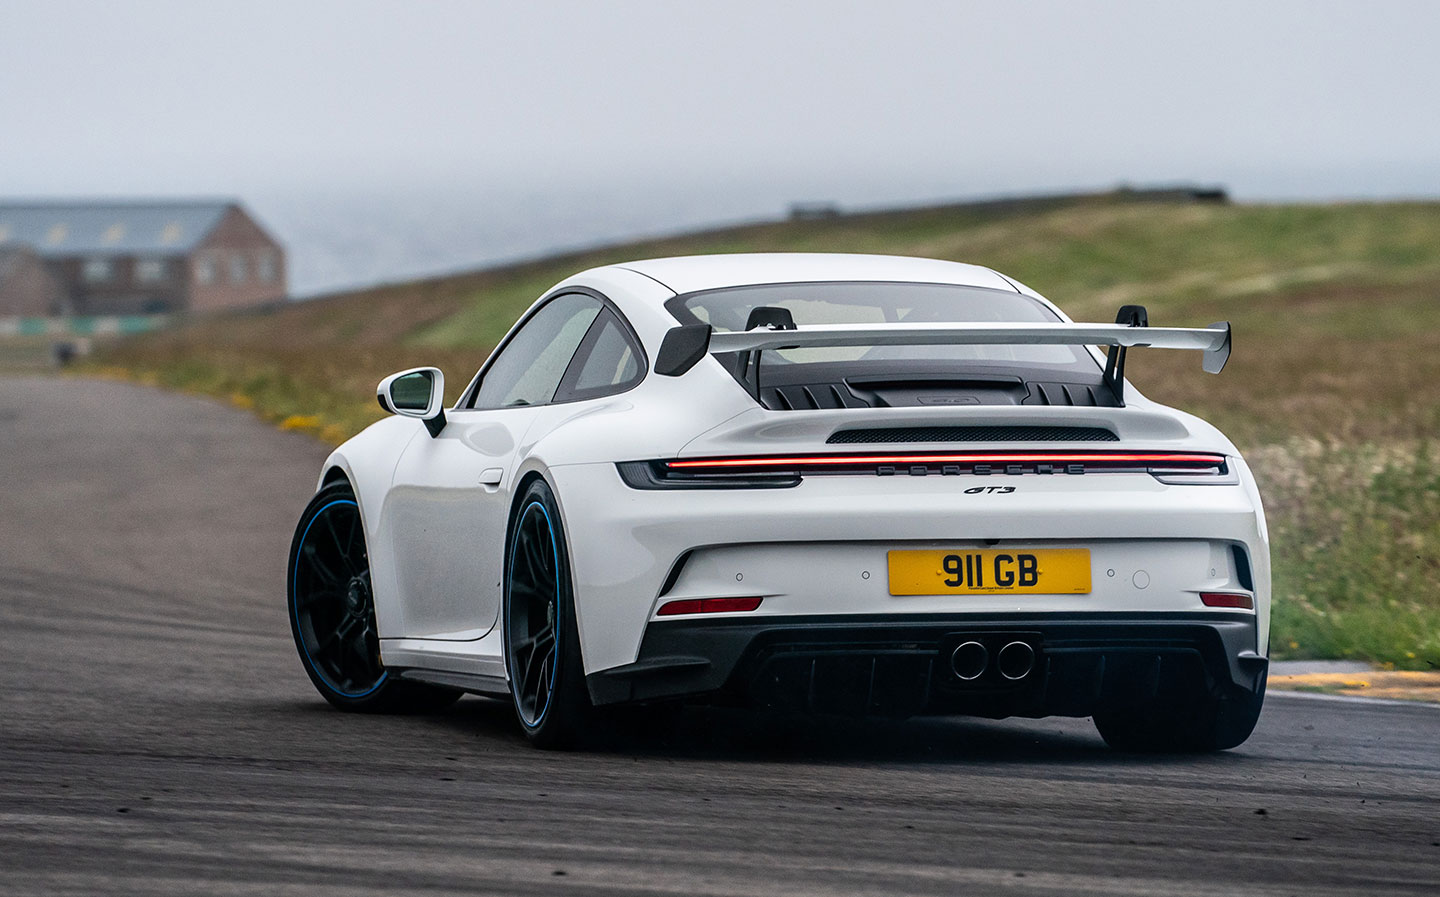 992 Porsche 911 GT3 review by Will Dron for Sunday Times Driving.co.uk